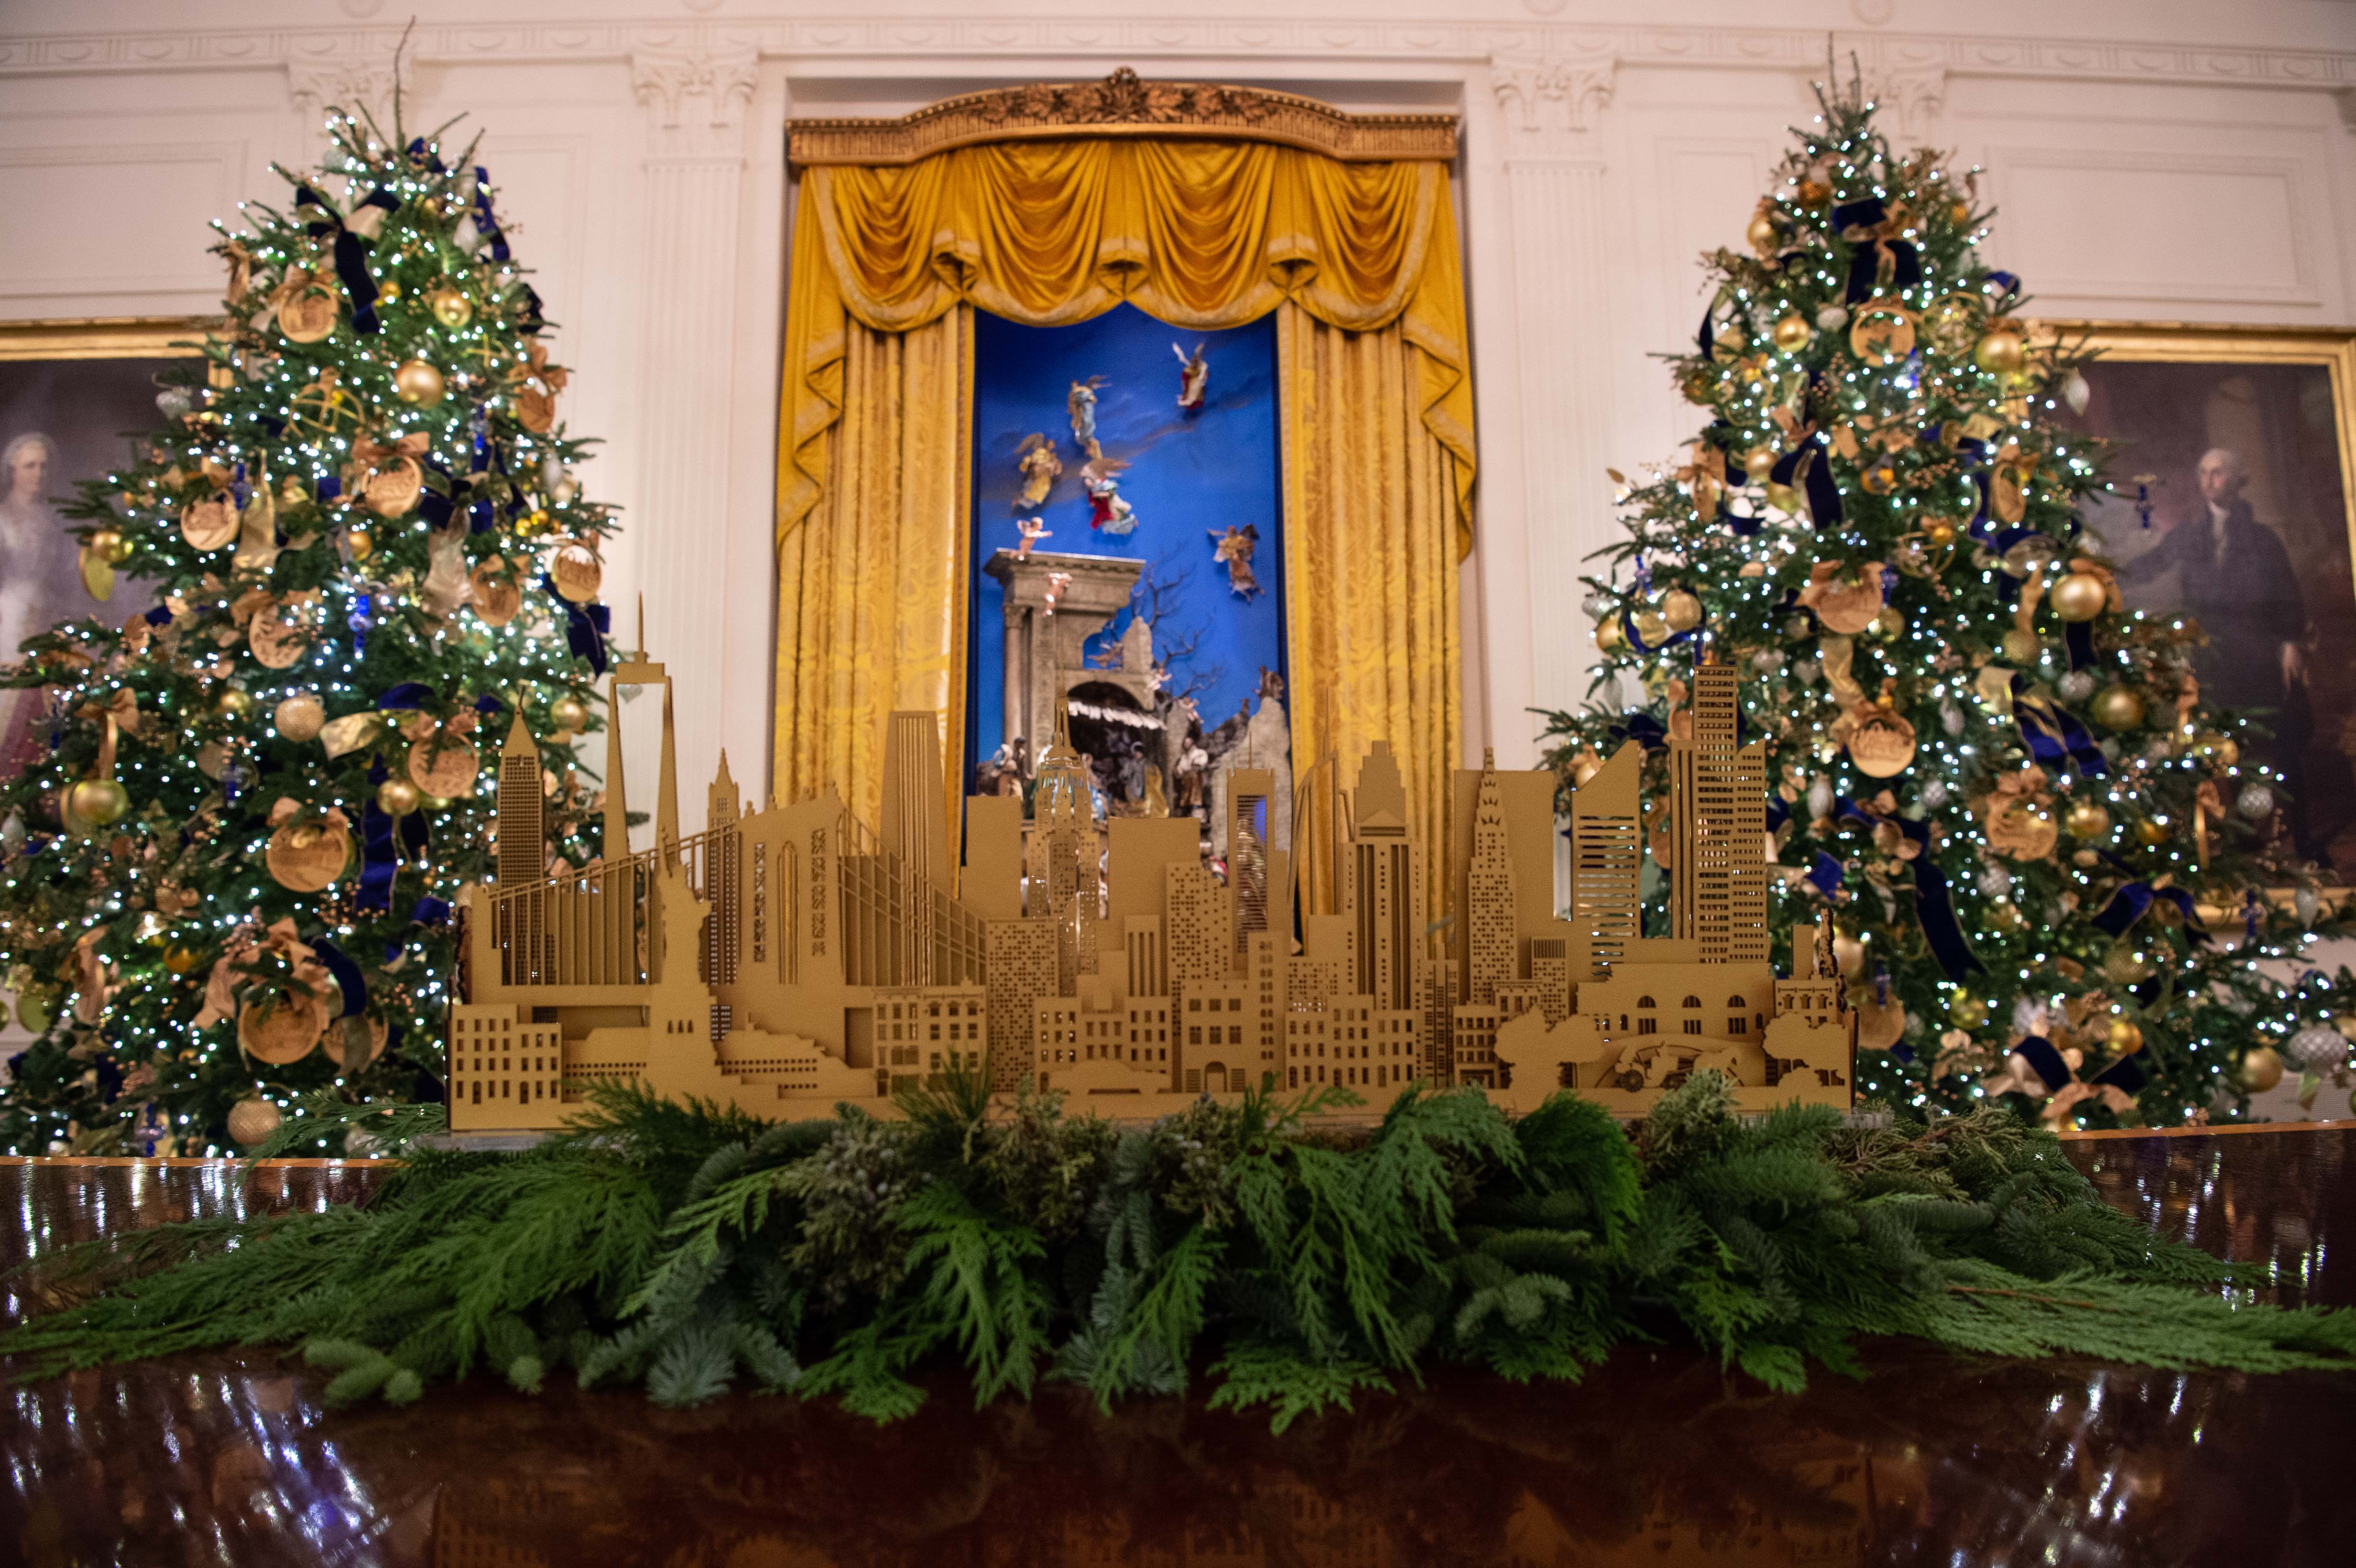 Christmas decorations are seen at the White House during a preview of the 2018 holiday decor in Washington, DC, on November 26, 2018. (Photo by NICHOLAS KAMM / AFP) (Photo credit should read NICHOLAS KAMM/AFP/Getty Images)